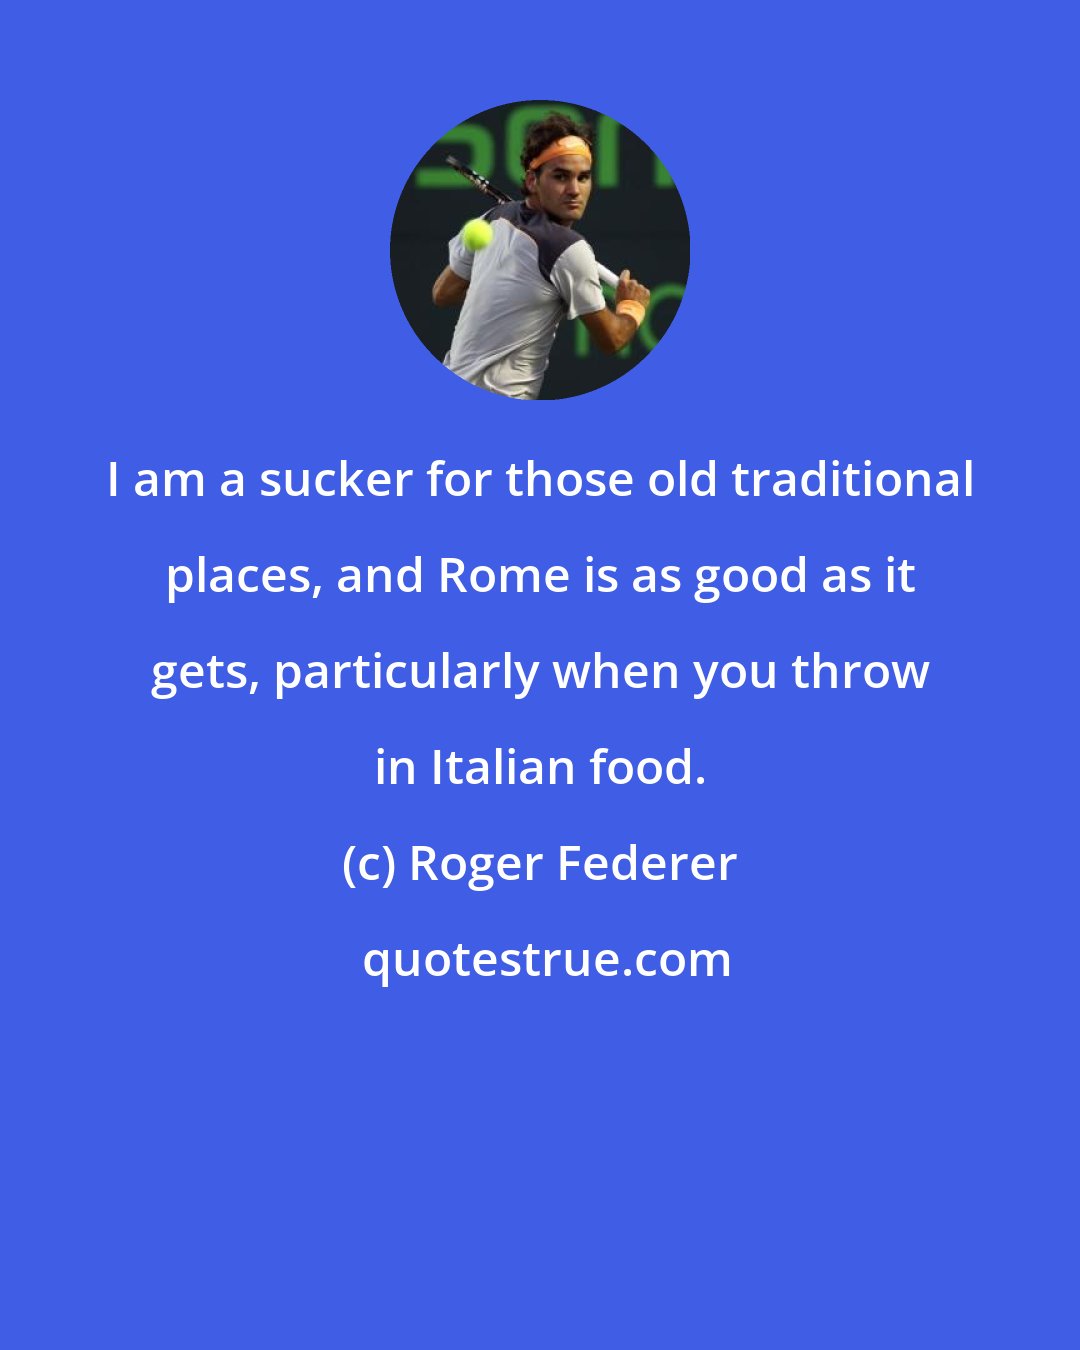 Roger Federer: I am a sucker for those old traditional places, and Rome is as good as it gets, particularly when you throw in Italian food.